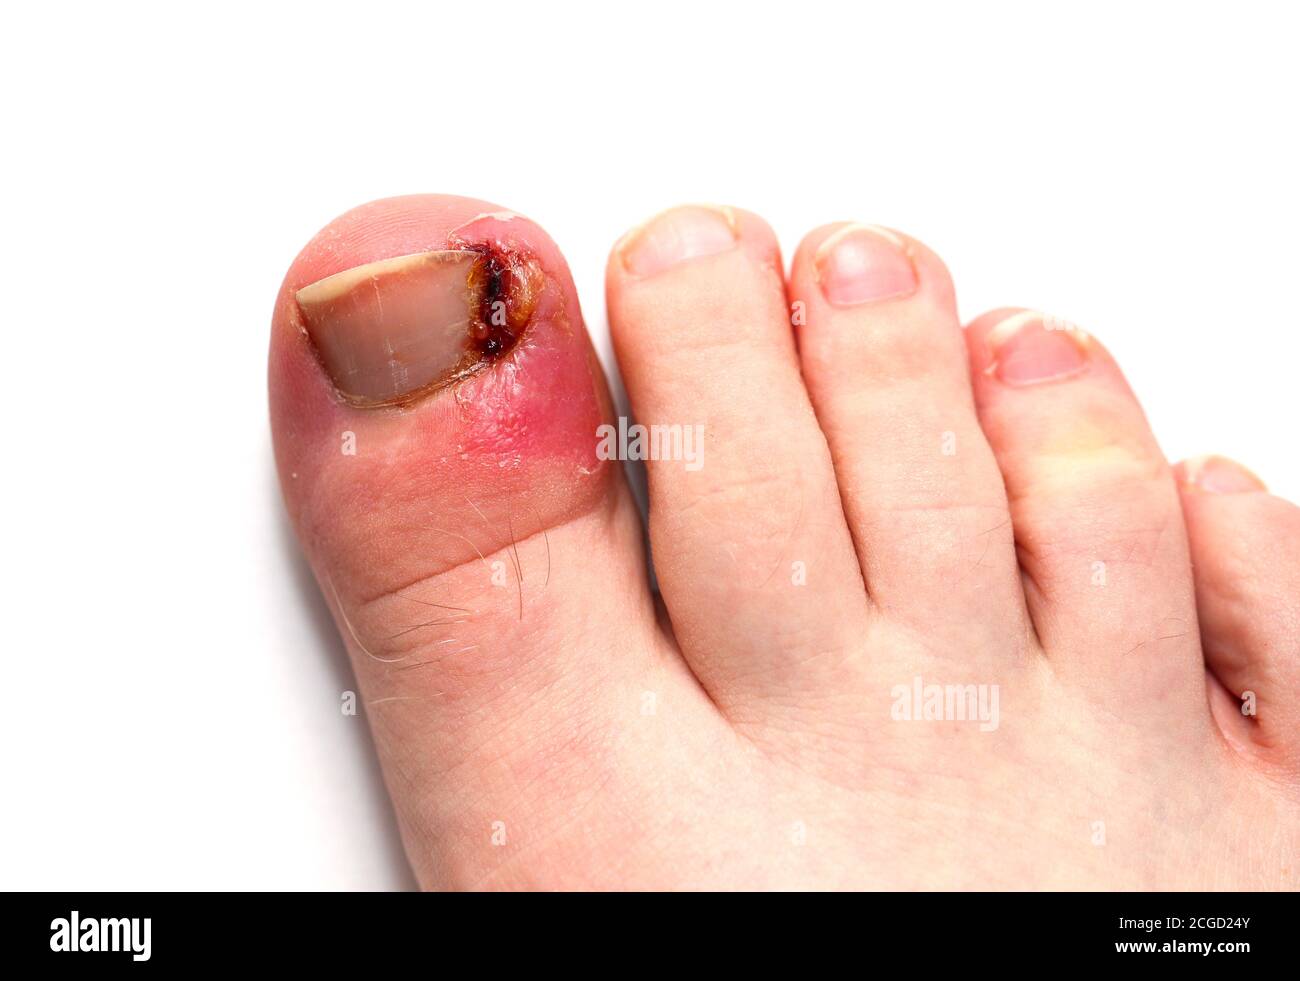 Infected ingrown toenail on a teenage male’s big toe against a white background. Stock Photo